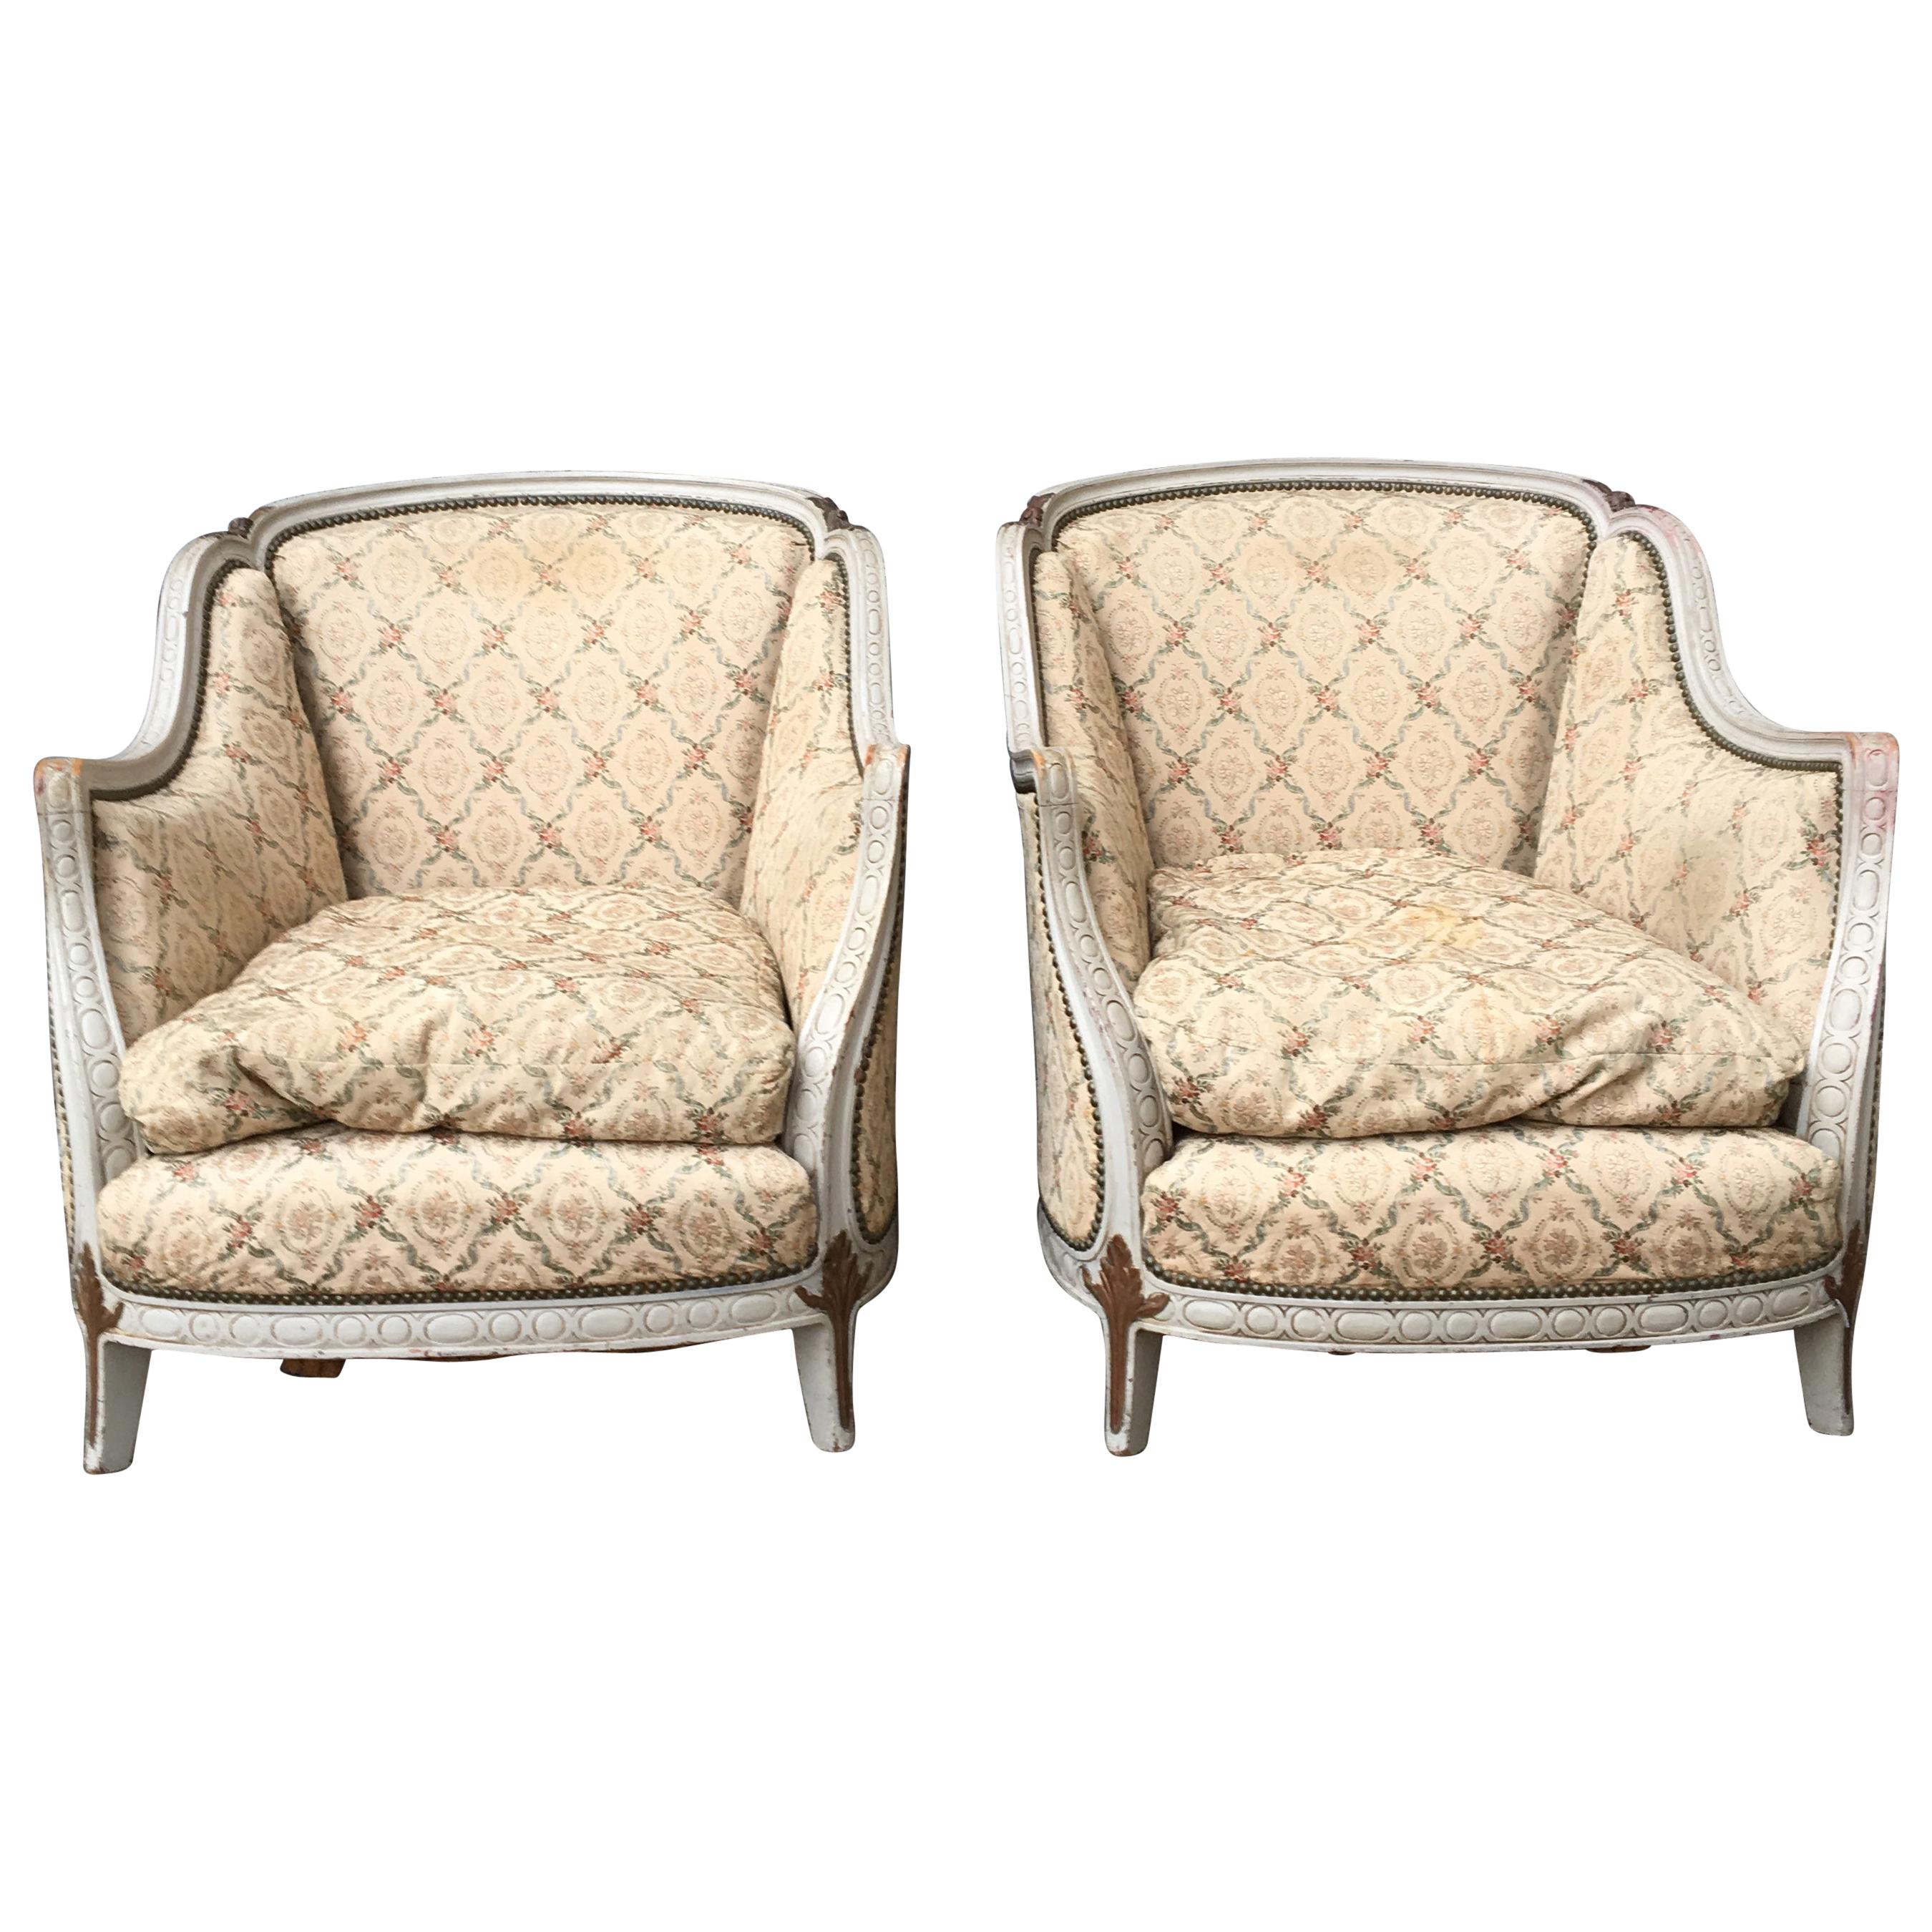 French Pair of White Painted Rococo Bergère Armchairs